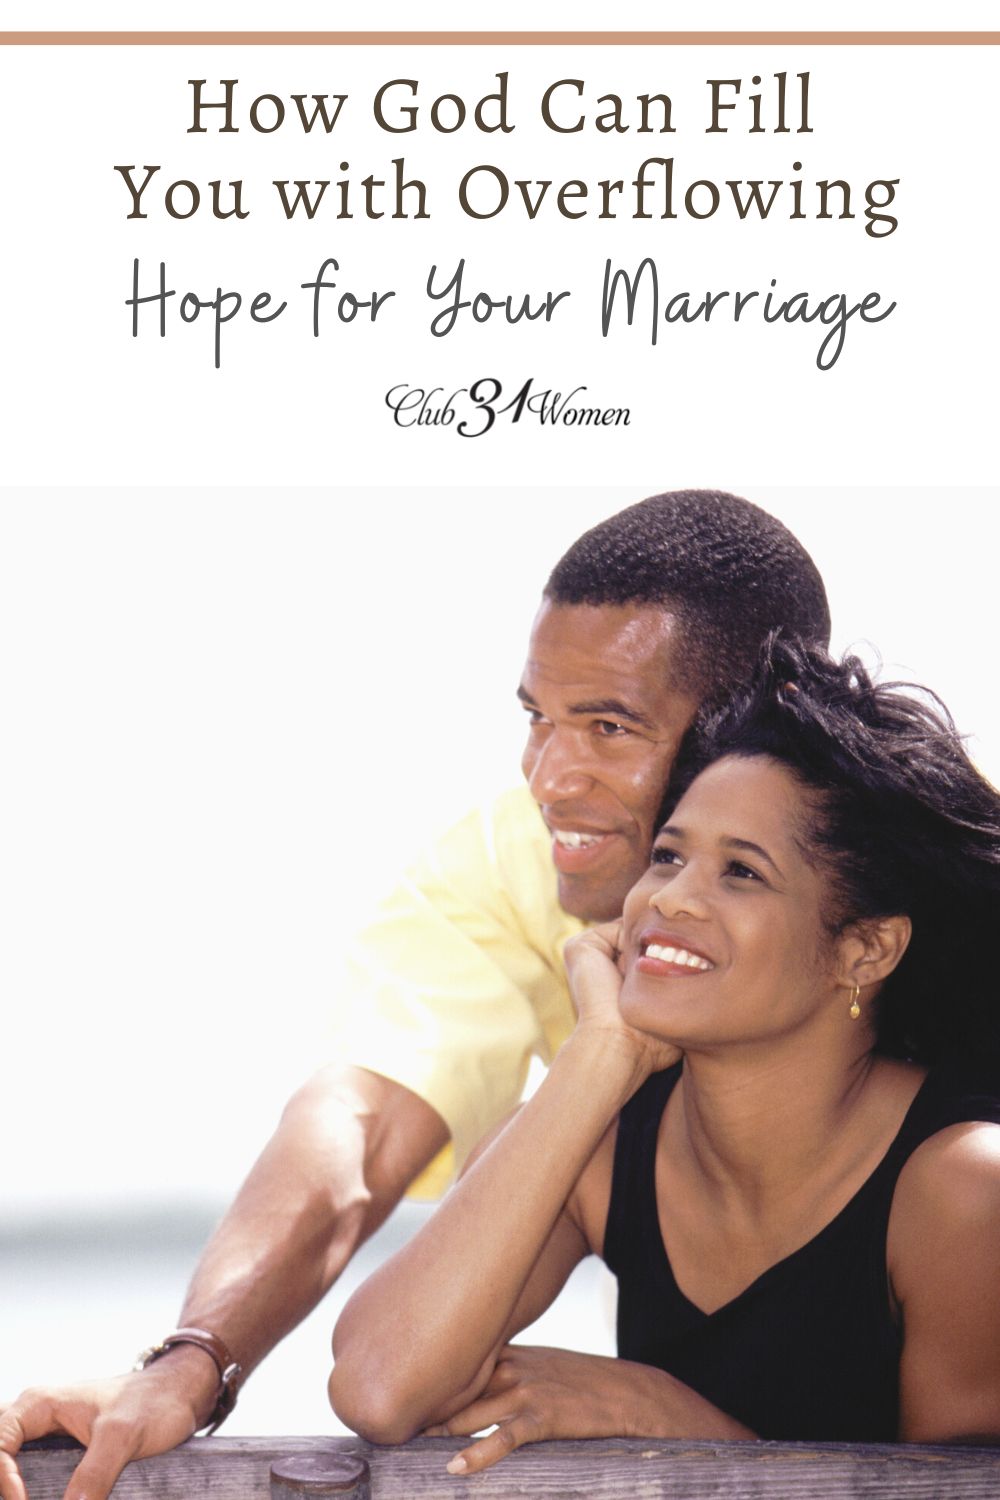 To the world, even to the human eye, a marriage can appear doomed. God wants to give you hope for your marriage because He is greater than our circumstances! via @Club31Women